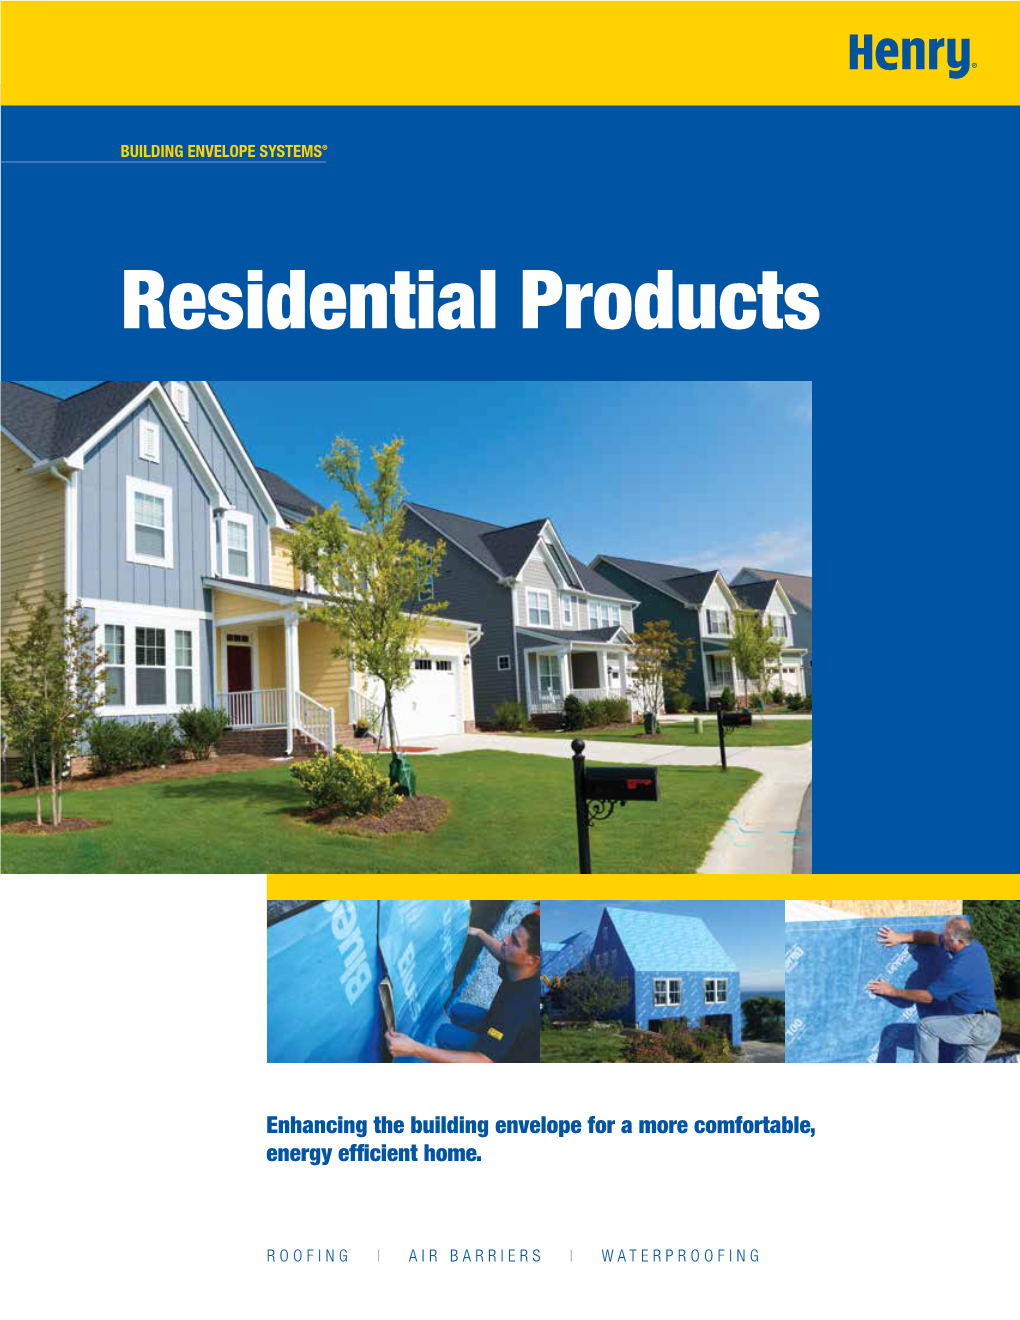 Download the Henry Residential Products Brochure